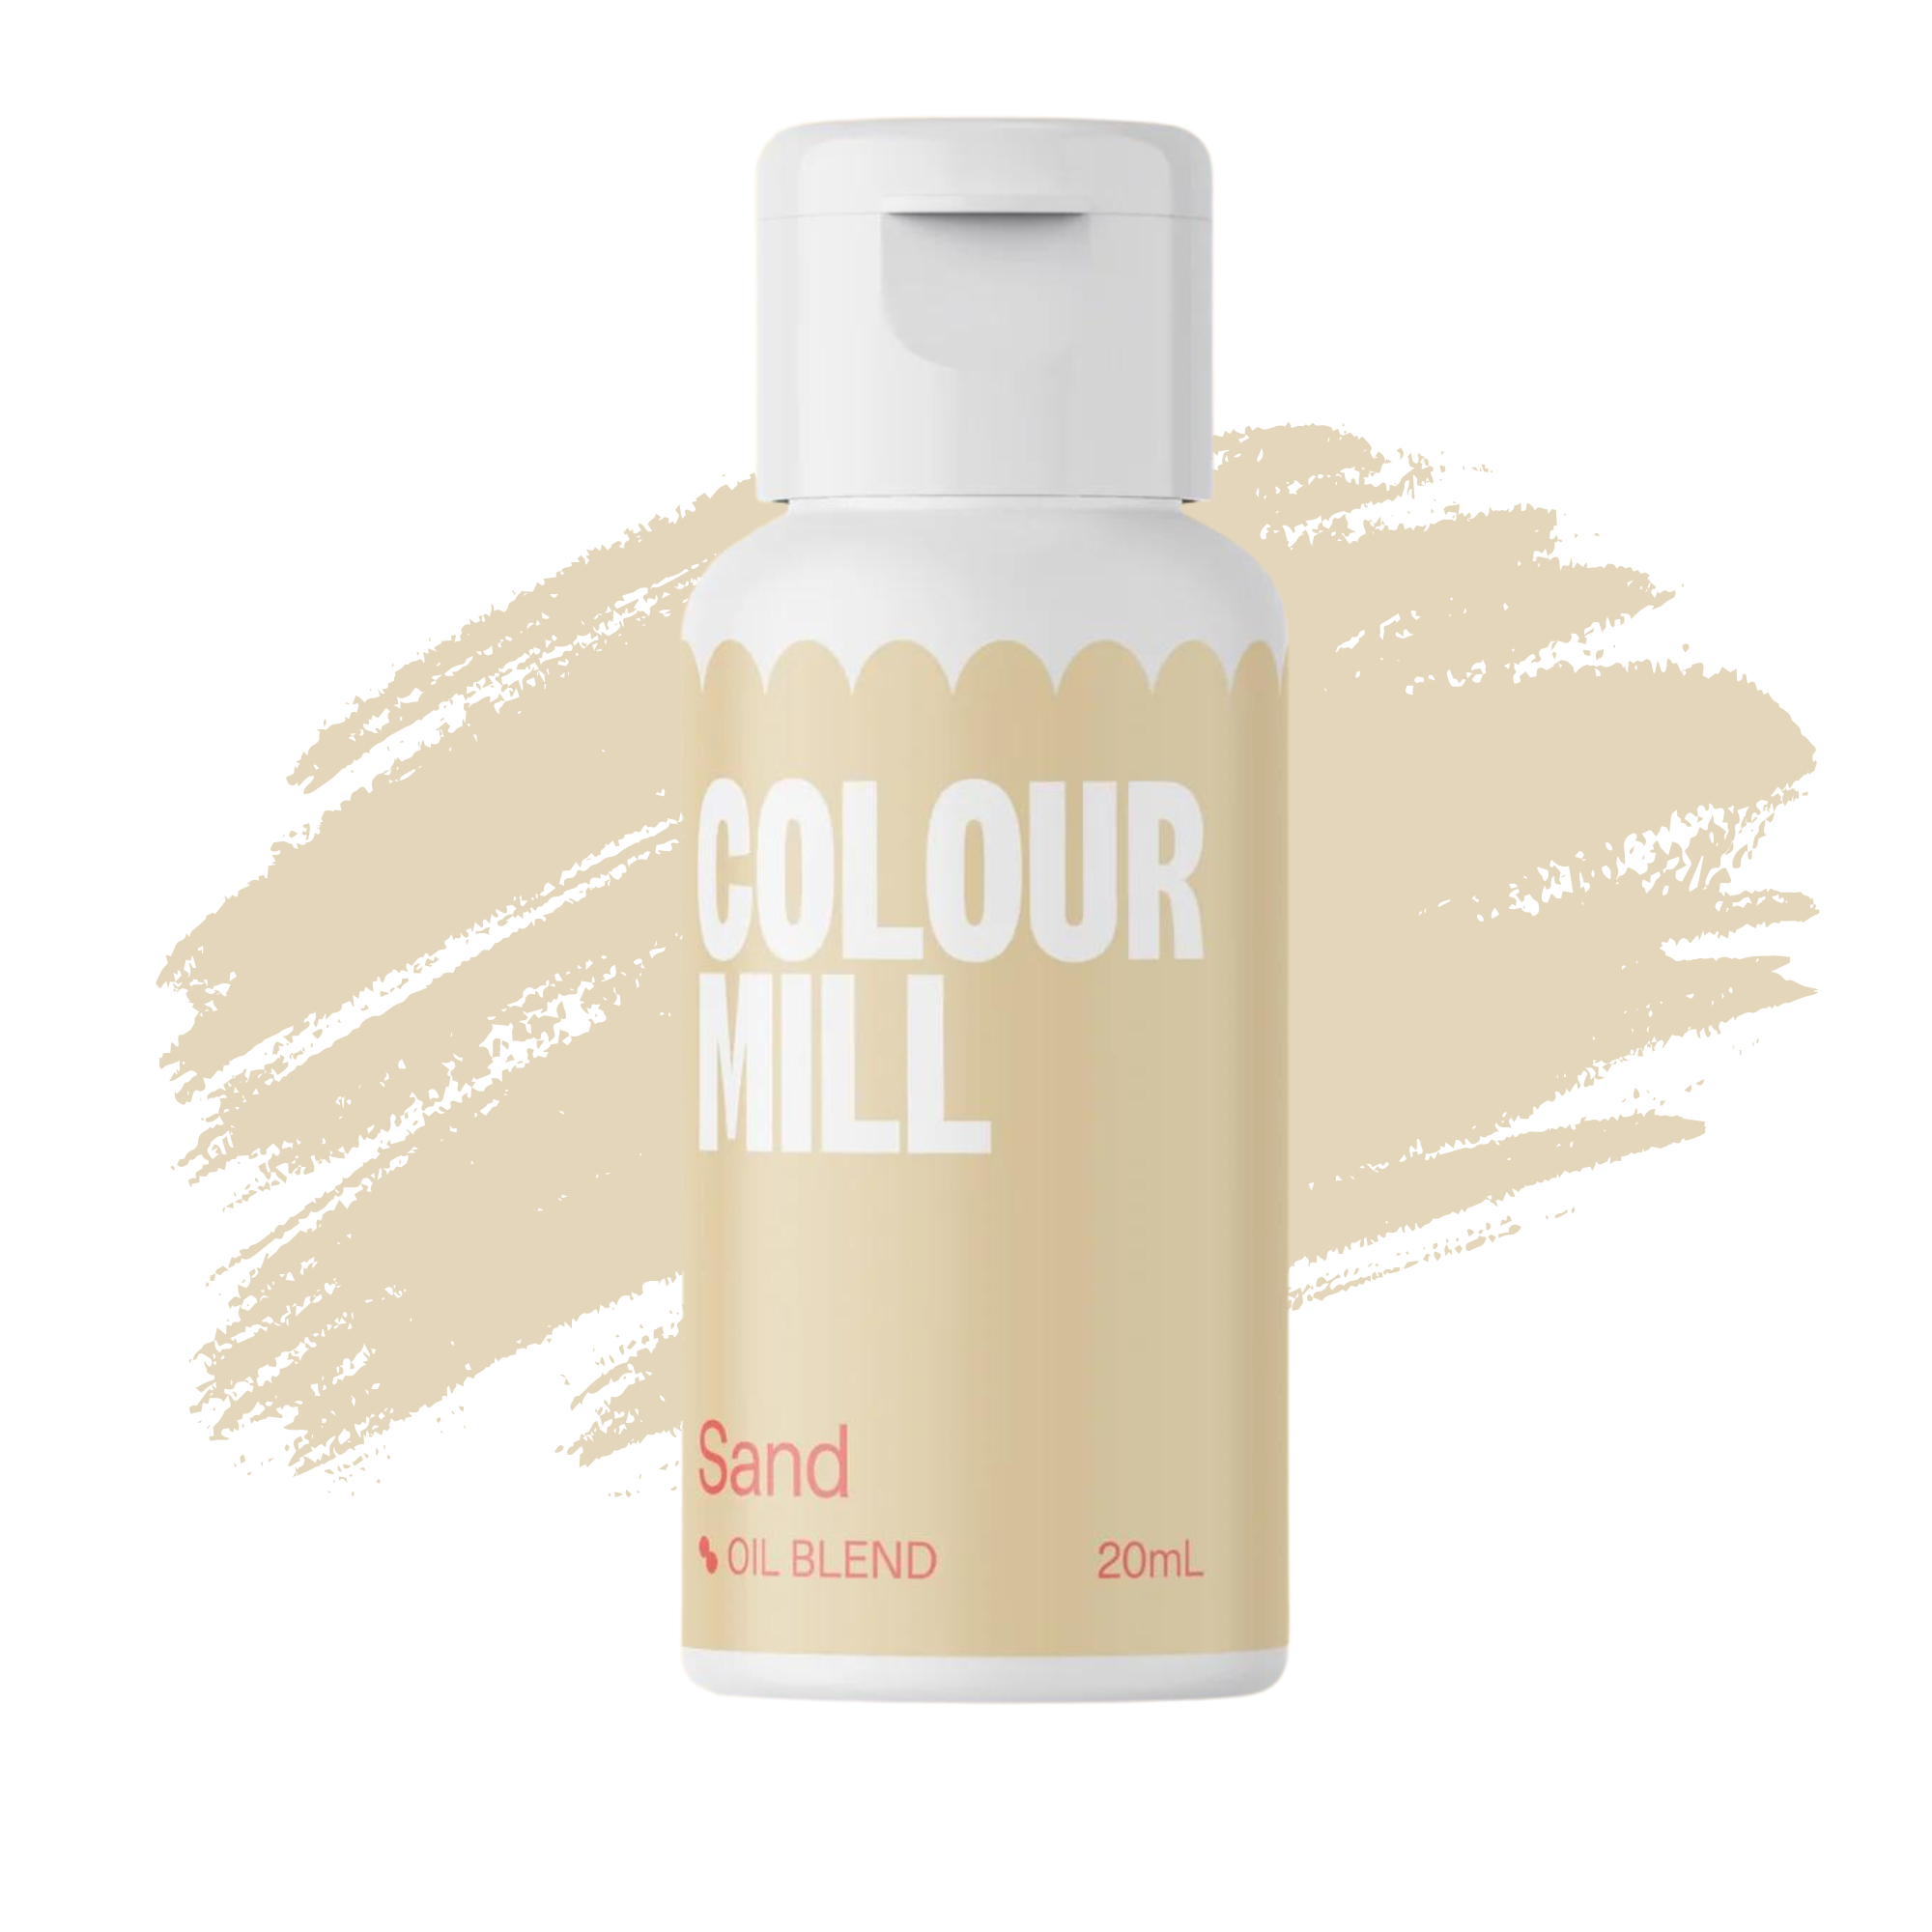 Colour Mill Sand Food Colouring, Beige Food Colouring, Oil Based Food Colouring, Colour Mill Food Colouring